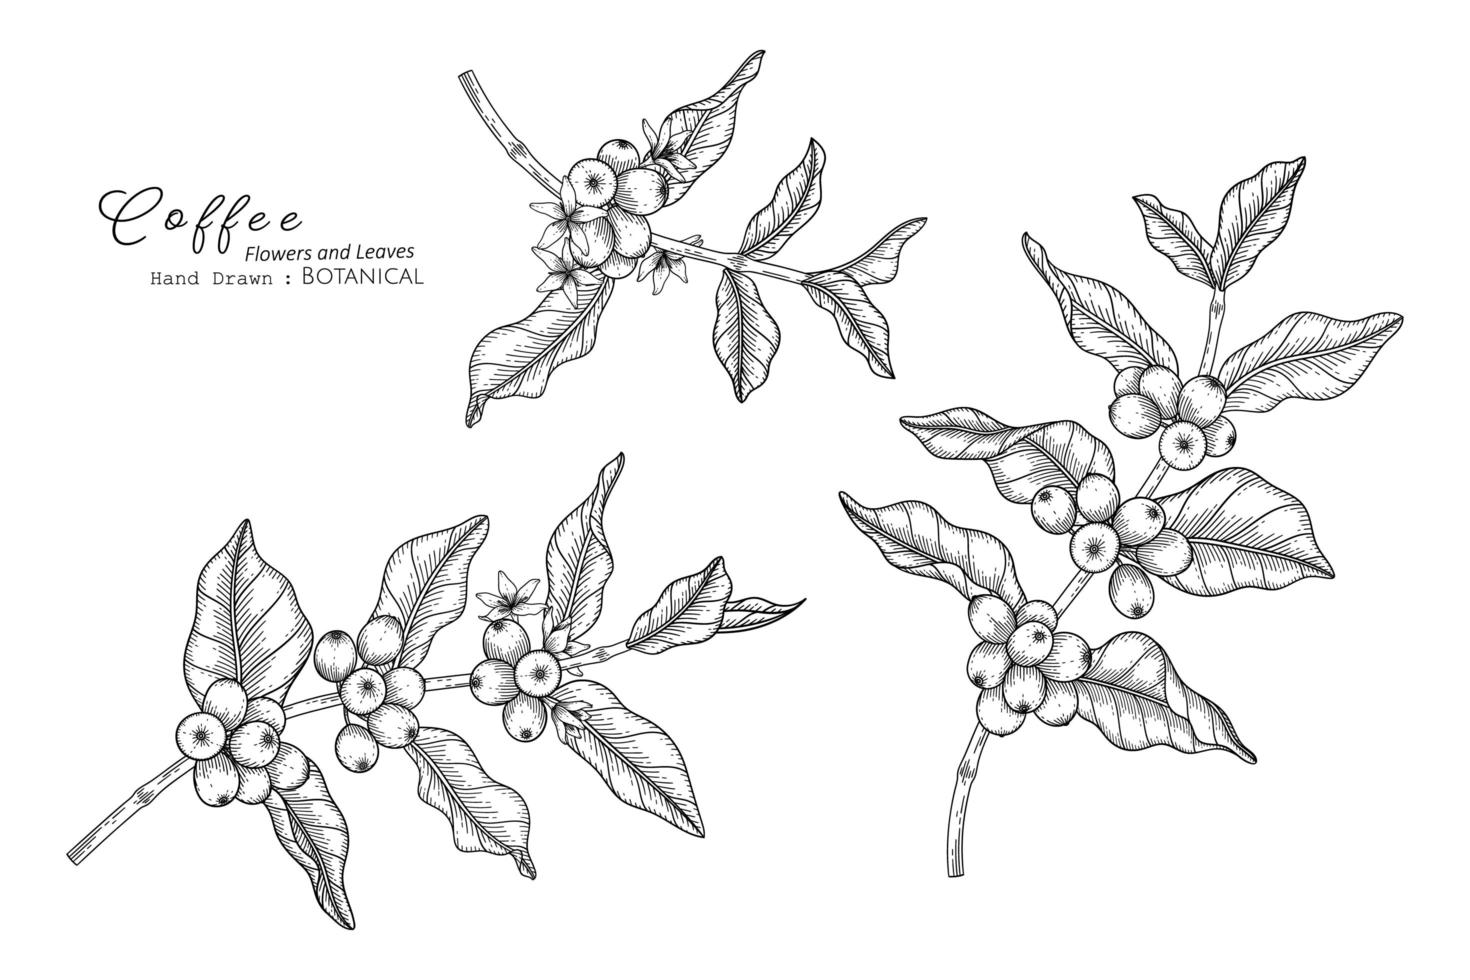 Coffee flower and leaf hand drawn botanical illustration with line art vector